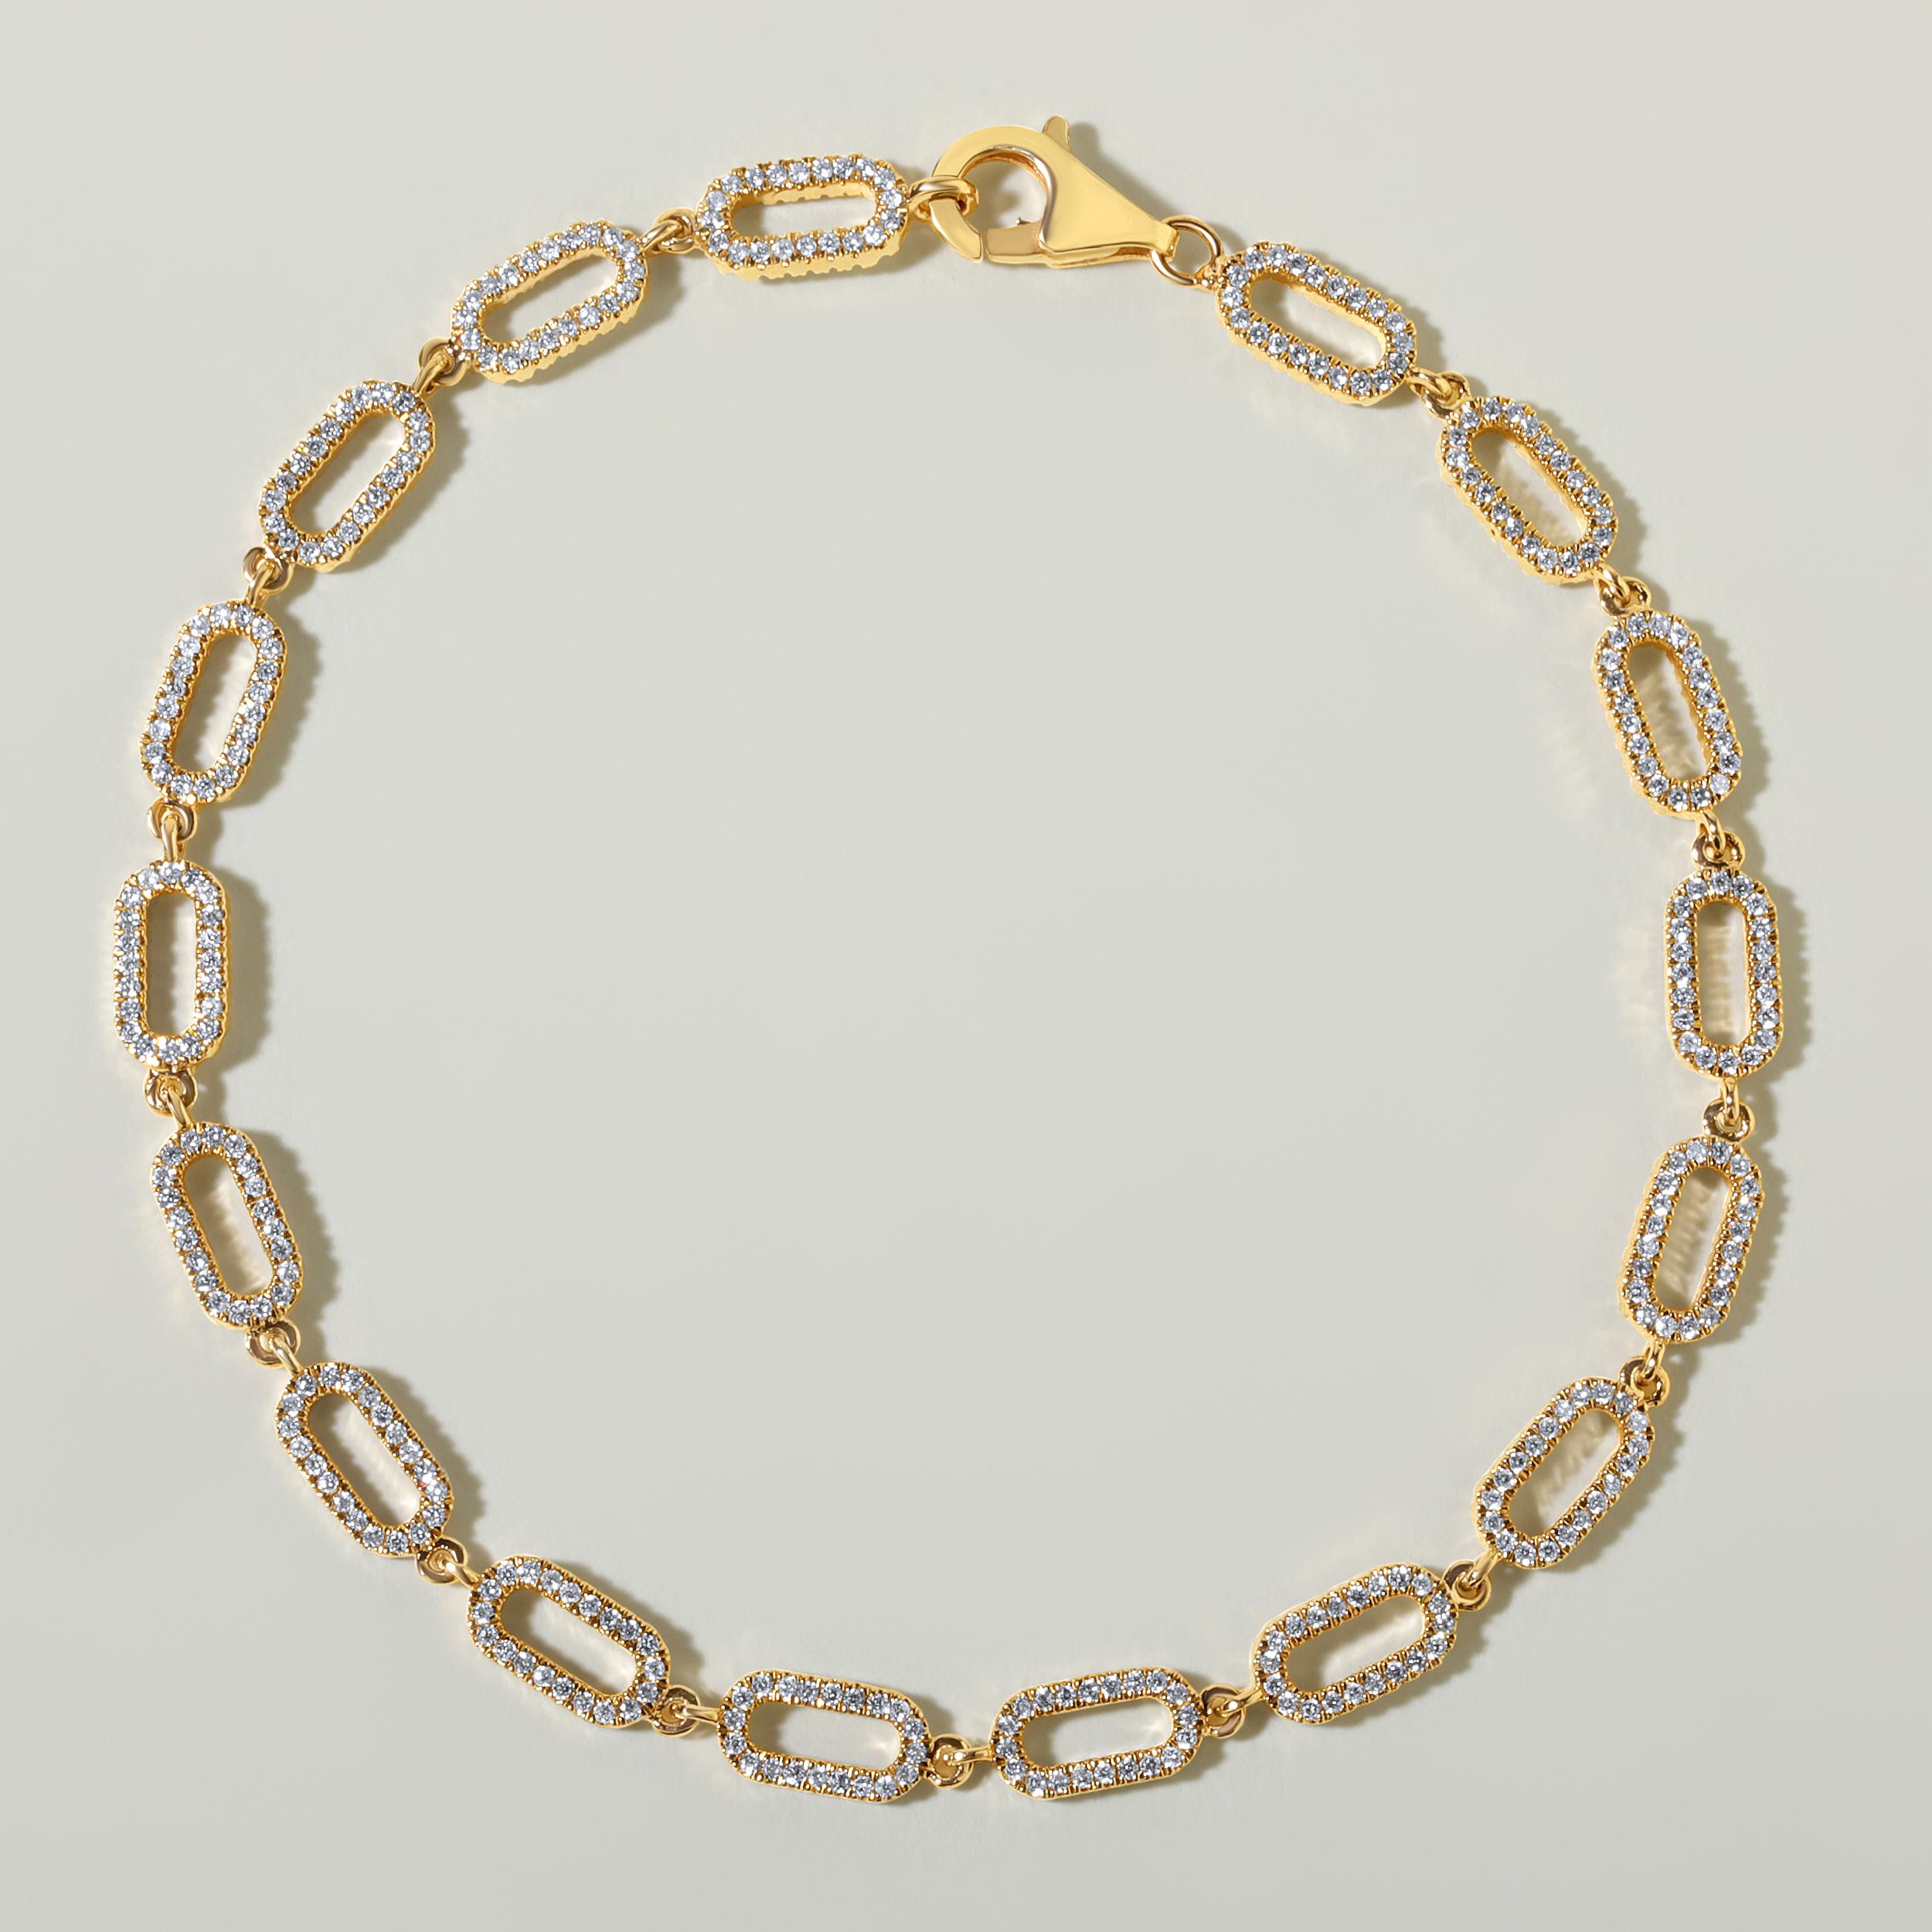 Crafted in 4.1 grams of 14K Yellow Gold, the bracelet contains 340 stones of Round Natural Diamonds with a total of 0.79 carat in E-F color and SI clarity. The bracelet length is 7 inches.
CONTEMPORARY AND TIMELESS ESSENCE: Crafted in